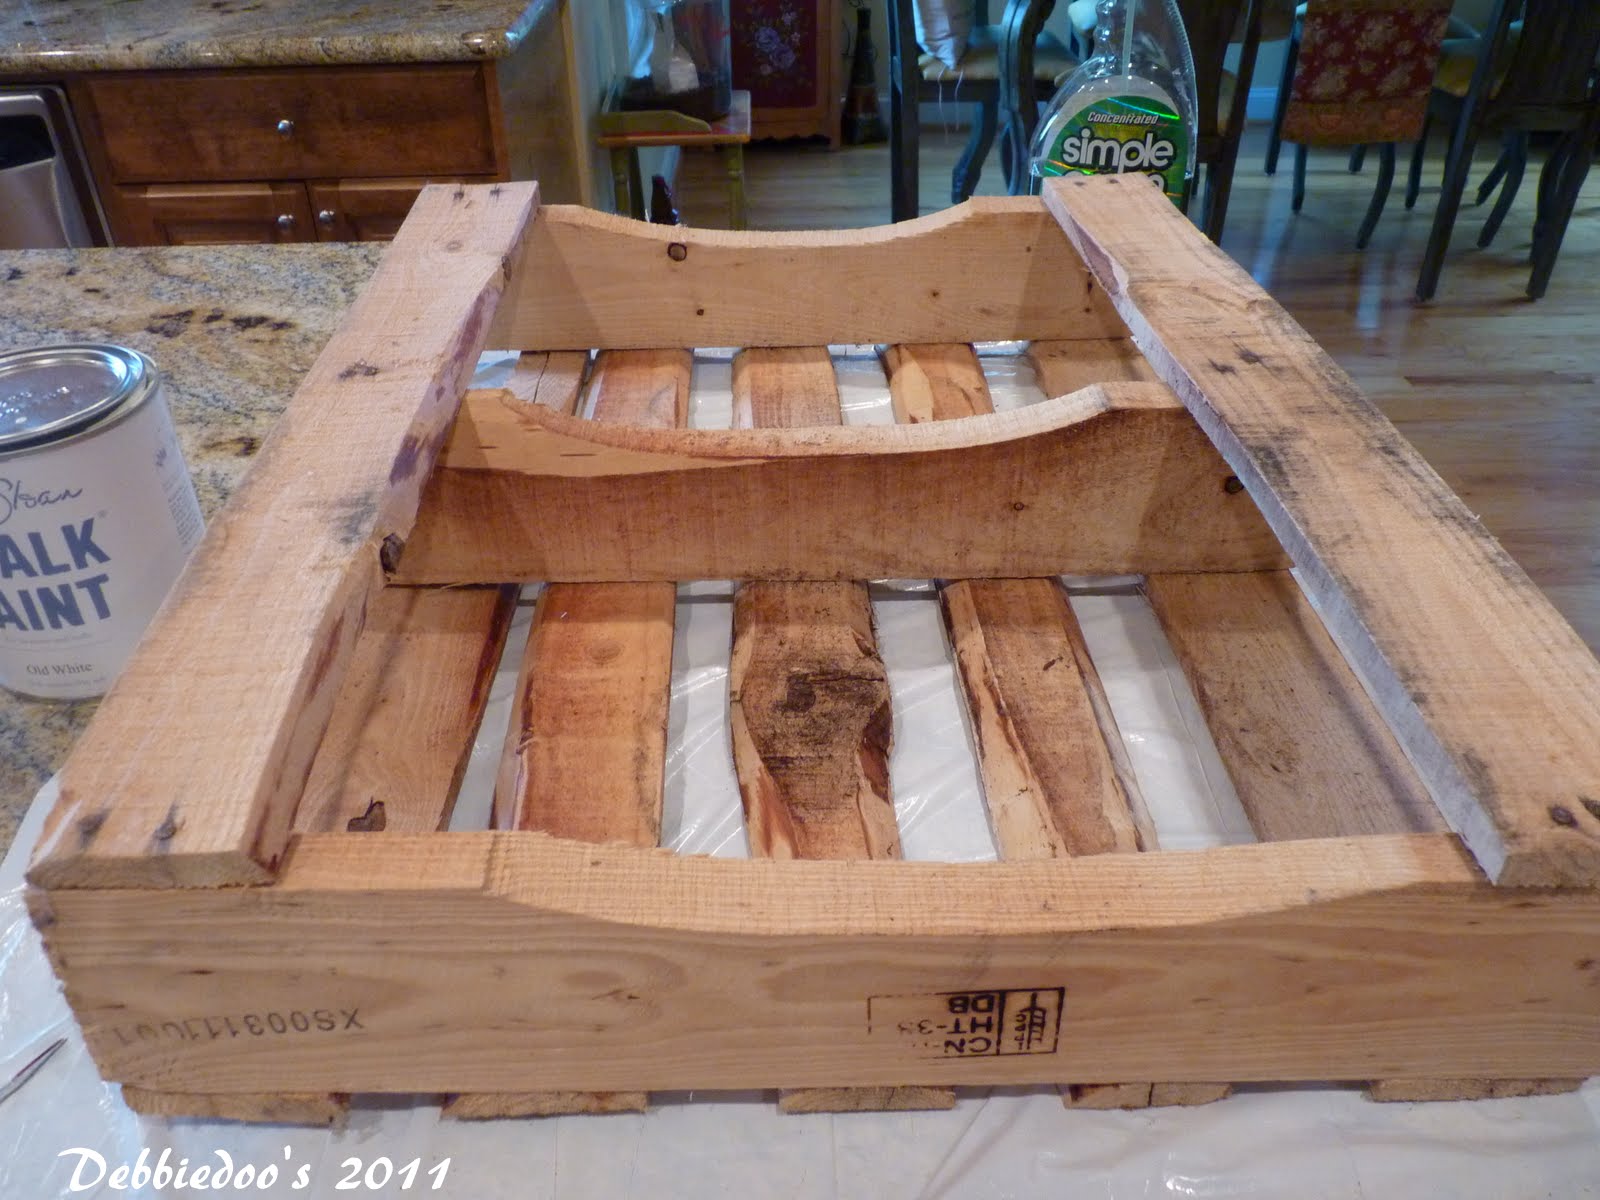 Upcycling a wood pallet, DIY project FREE! - Debbiedoo's